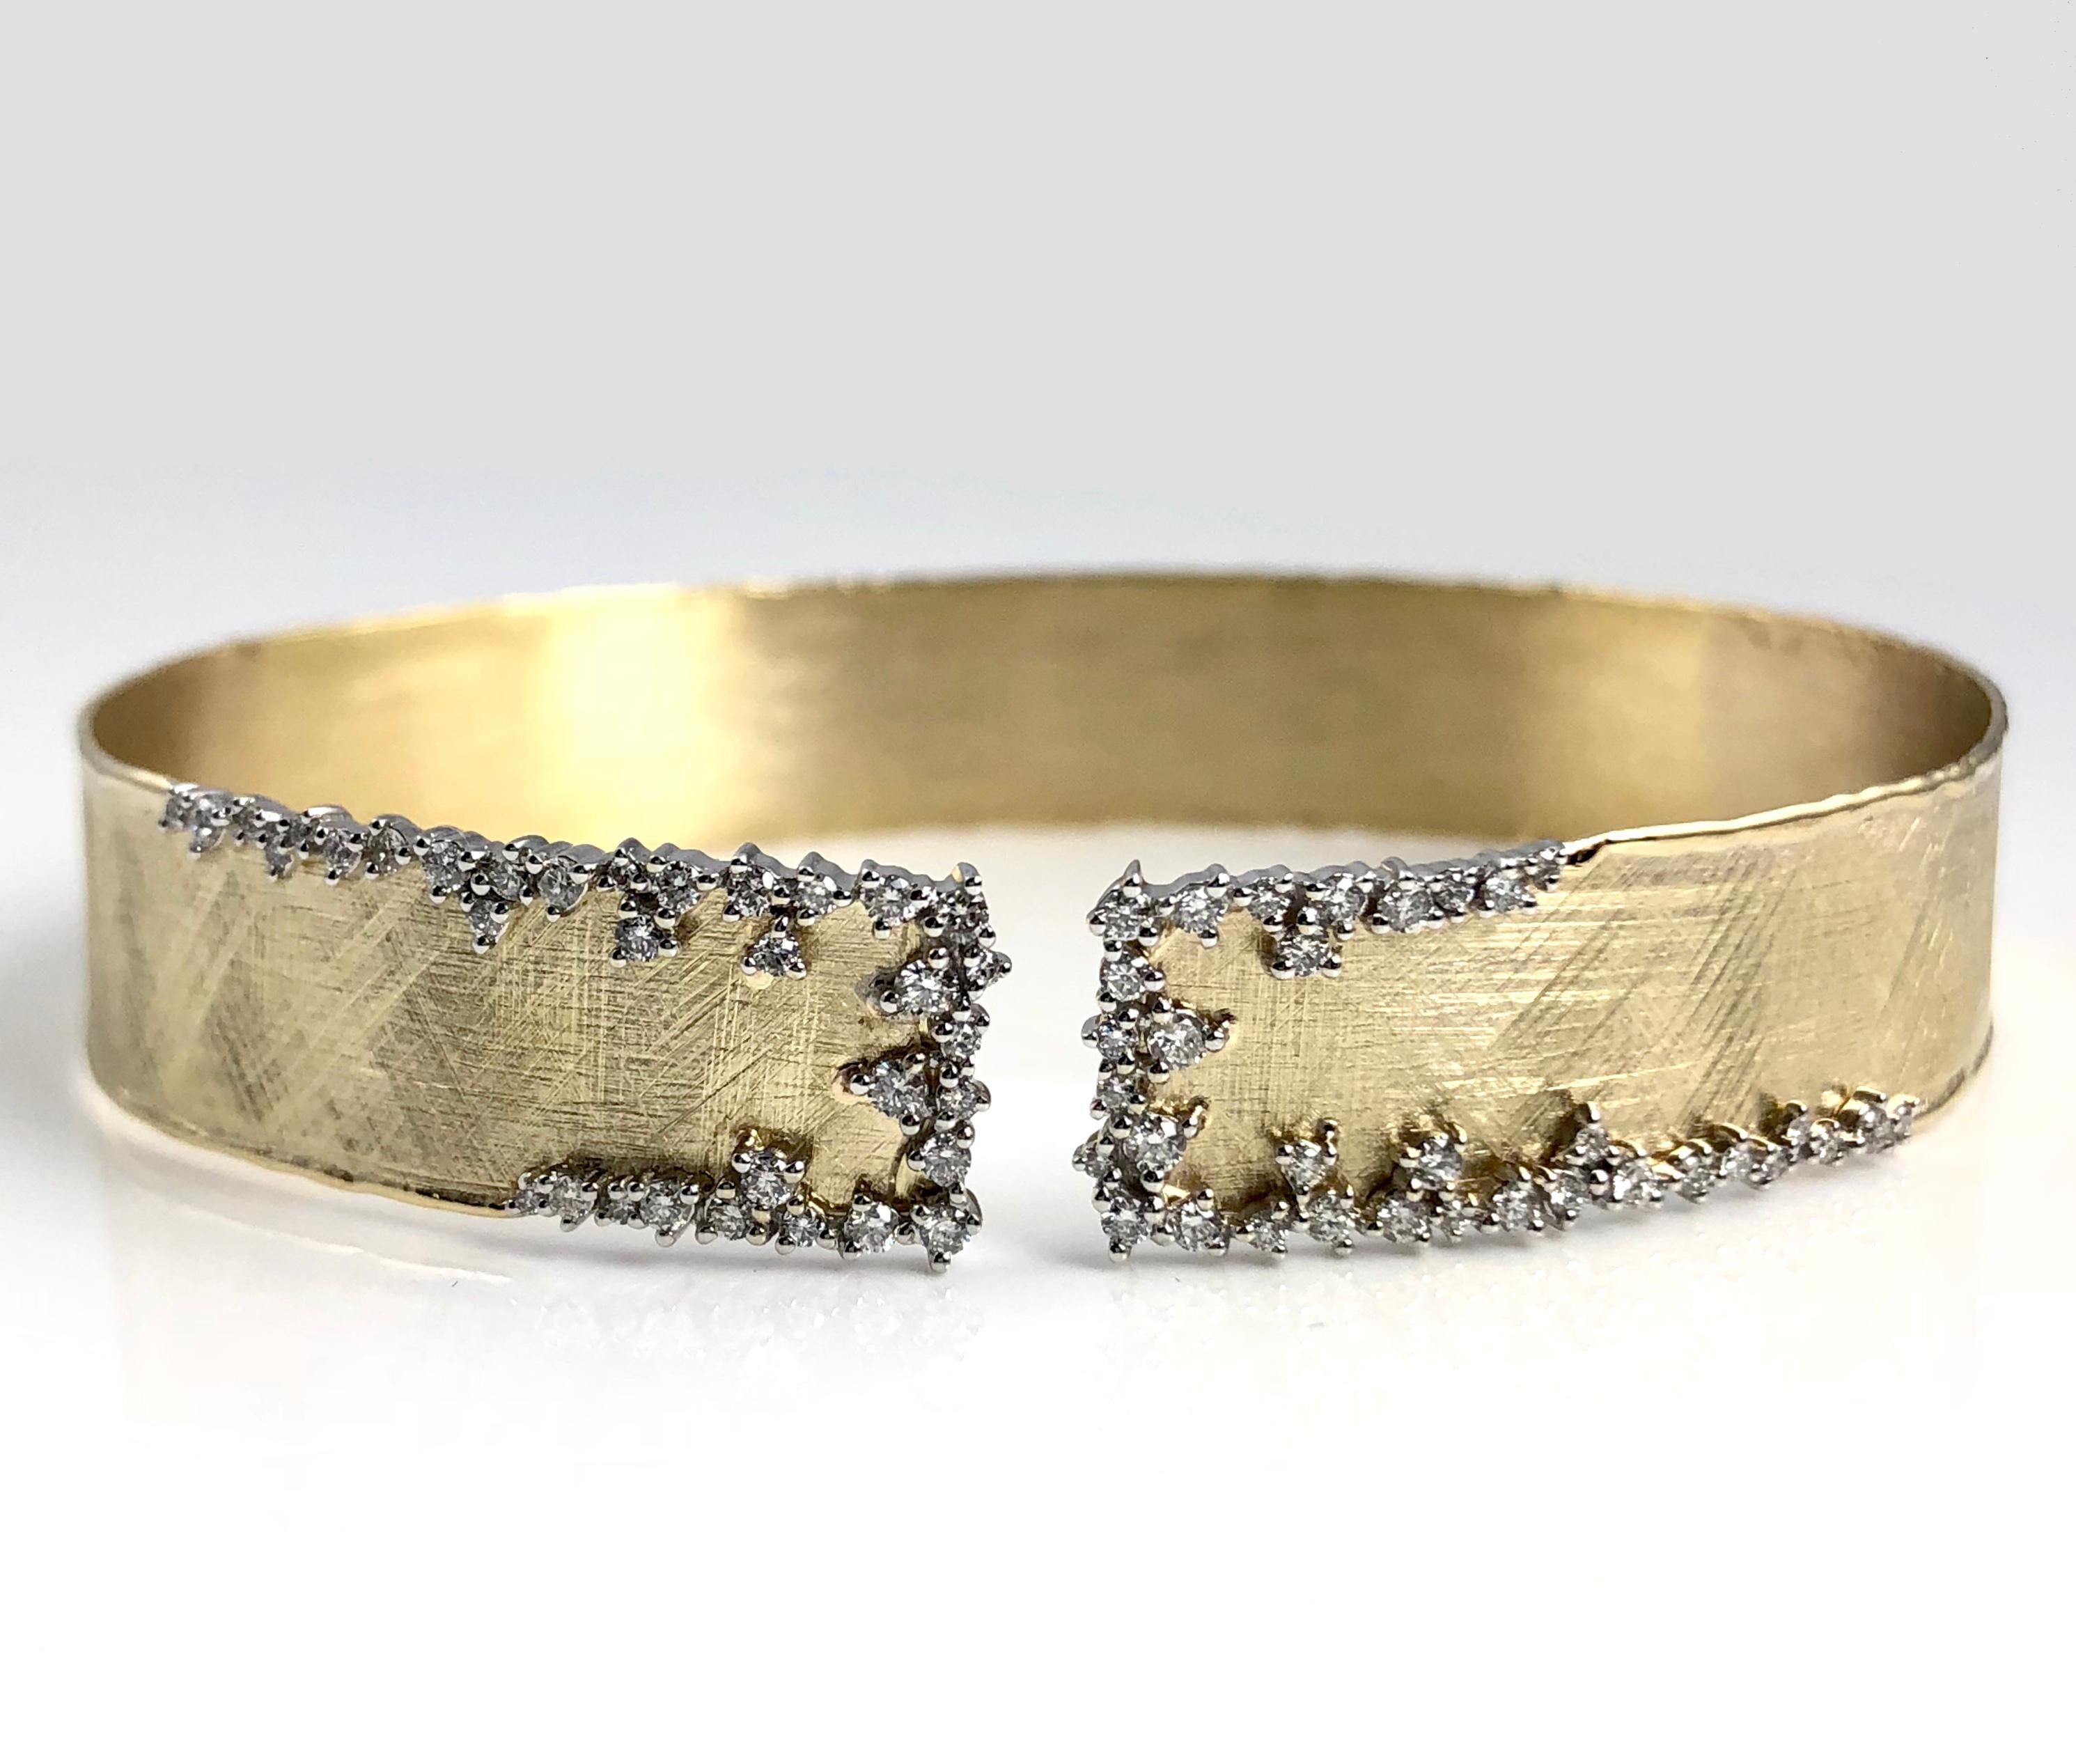 (DiamondTown) This rustic bangle has a brushed yellow gold design, accented by a delicate frost of round white diamonds at the opening. The bangle is flexible enough to pass over the hand, without any hinge or buckle.

The bangle is set in 14k